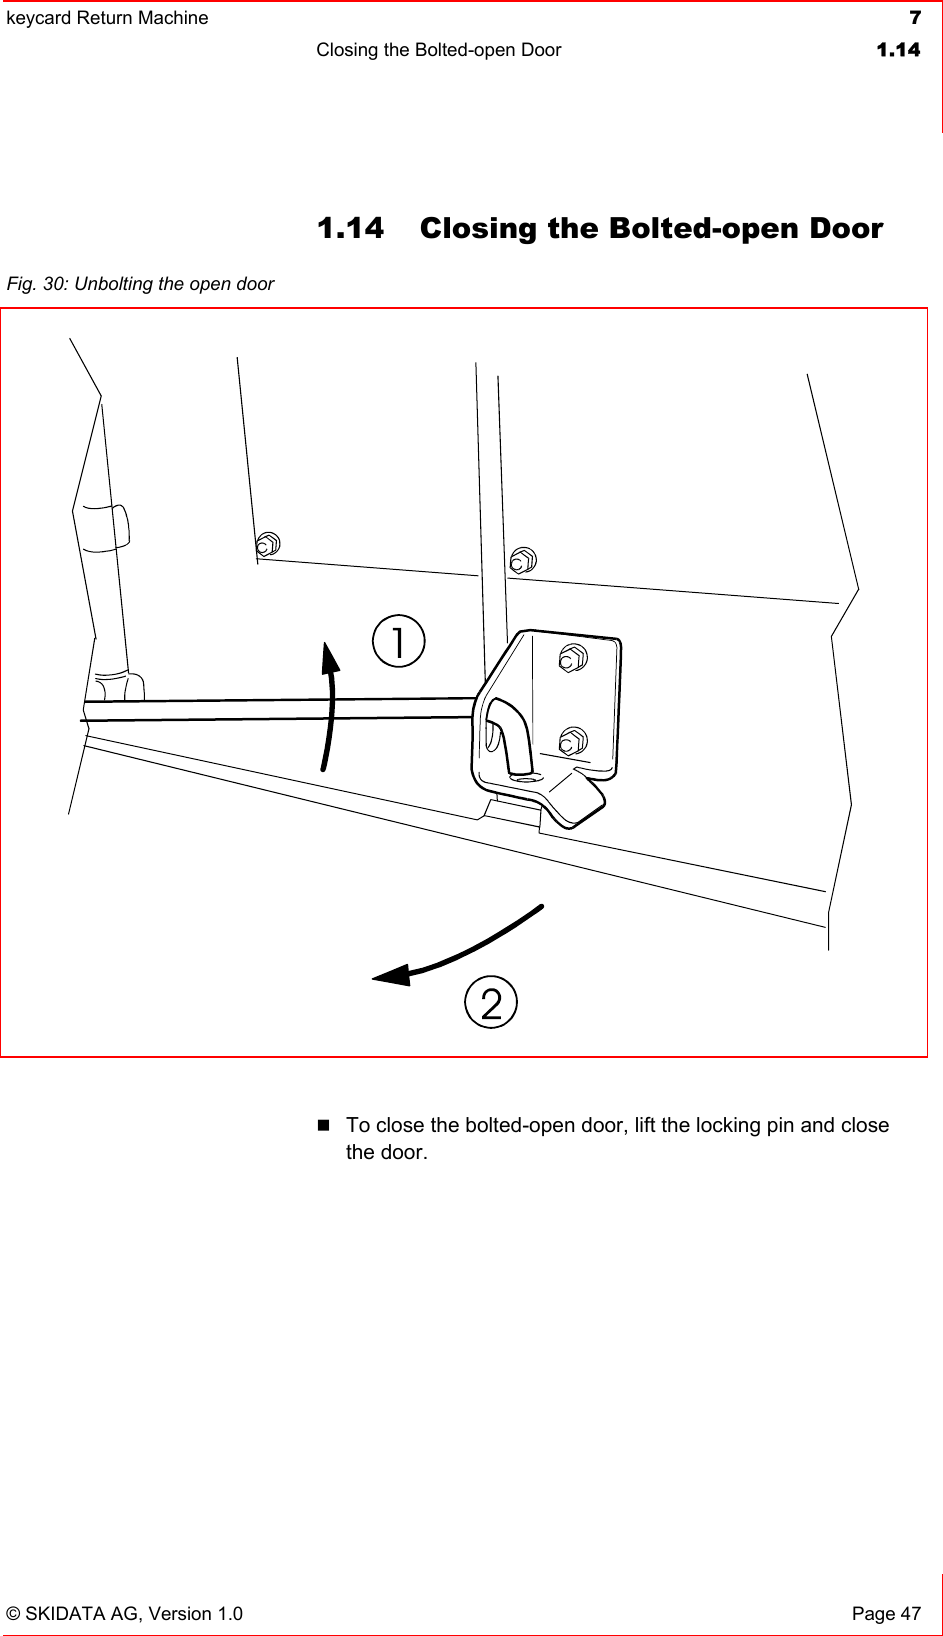 keycard Return Machine  7Closing the Bolted-open Door  1.14© SKIDATA AG, Version 1.0  Page 47 1.14  Closing the Bolted-open Door To close the bolted-open door, lift the locking pin and close the door. Fig. 30: Unbolting the open door 